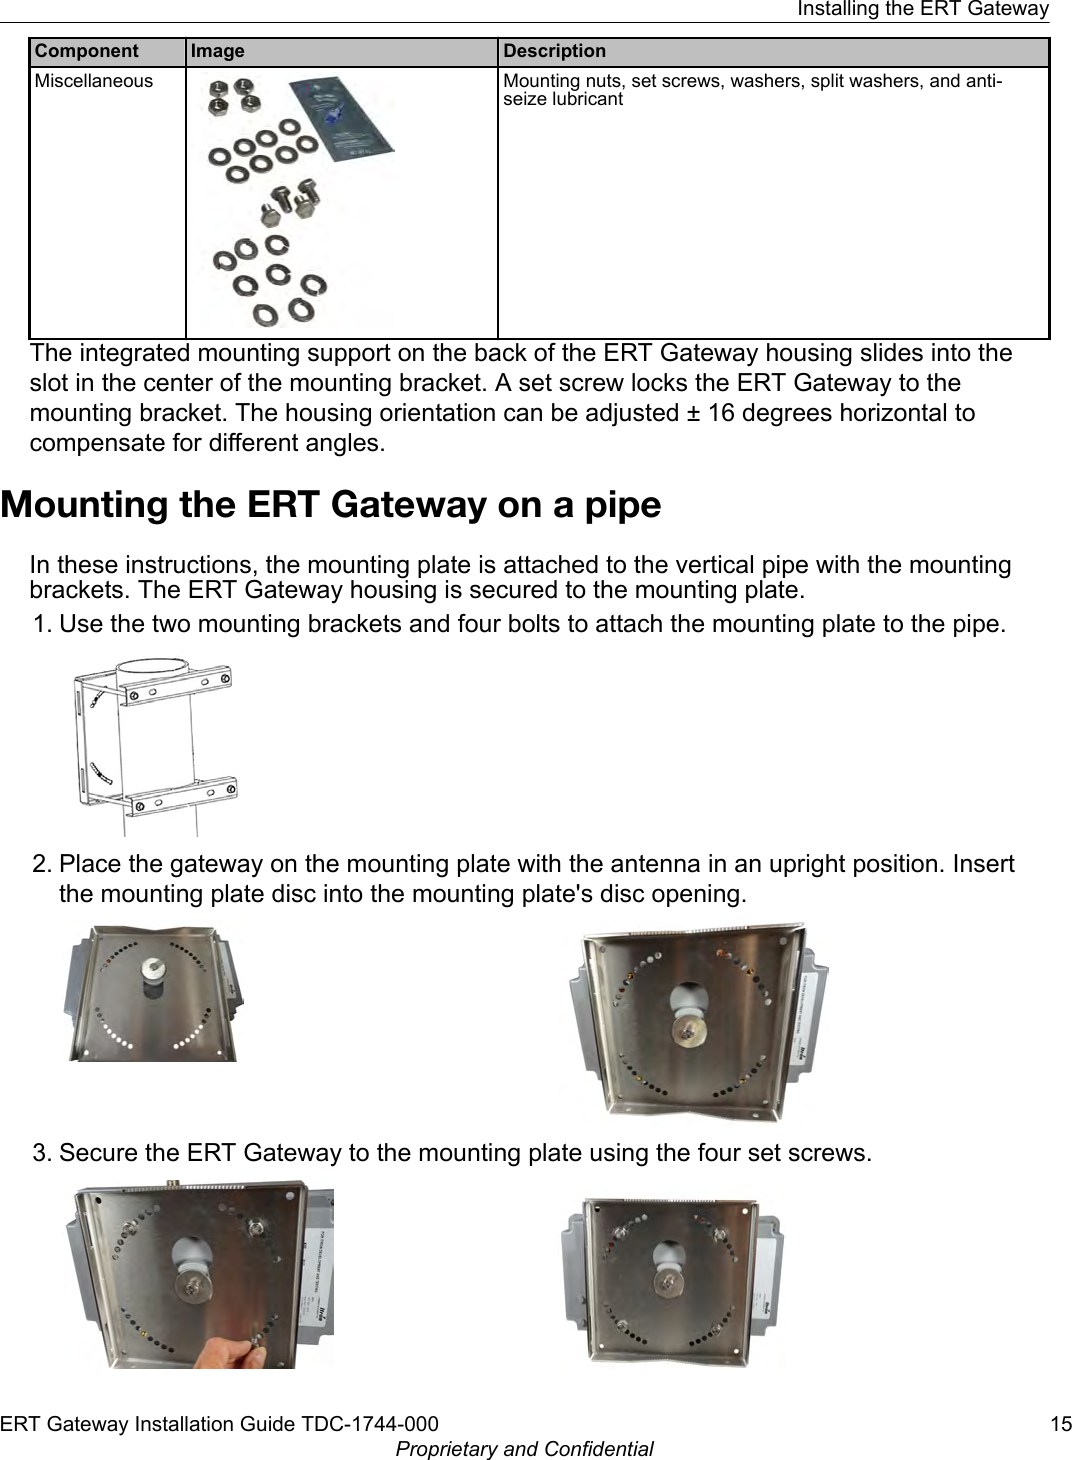 Component Image DescriptionMiscellaneous Mounting nuts, set screws, washers, split washers, and anti-seize lubricantThe integrated mounting support on the back of the ERT Gateway housing slides into theslot in the center of the mounting bracket. A set screw locks the ERT Gateway to themounting bracket. The housing orientation can be adjusted ± 16 degrees horizontal tocompensate for different angles.Mounting the ERT Gateway on a pipeIn these instructions, the mounting plate is attached to the vertical pipe with the mountingbrackets. The ERT Gateway housing is secured to the mounting plate.1. Use the two mounting brackets and four bolts to attach the mounting plate to the pipe.2. Place the gateway on the mounting plate with the antenna in an upright position. Insertthe mounting plate disc into the mounting plate&apos;s disc opening.3. Secure the ERT Gateway to the mounting plate using the four set screws.Installing the ERT GatewayERT Gateway Installation Guide TDC-1744-000 15Proprietary and Confidential